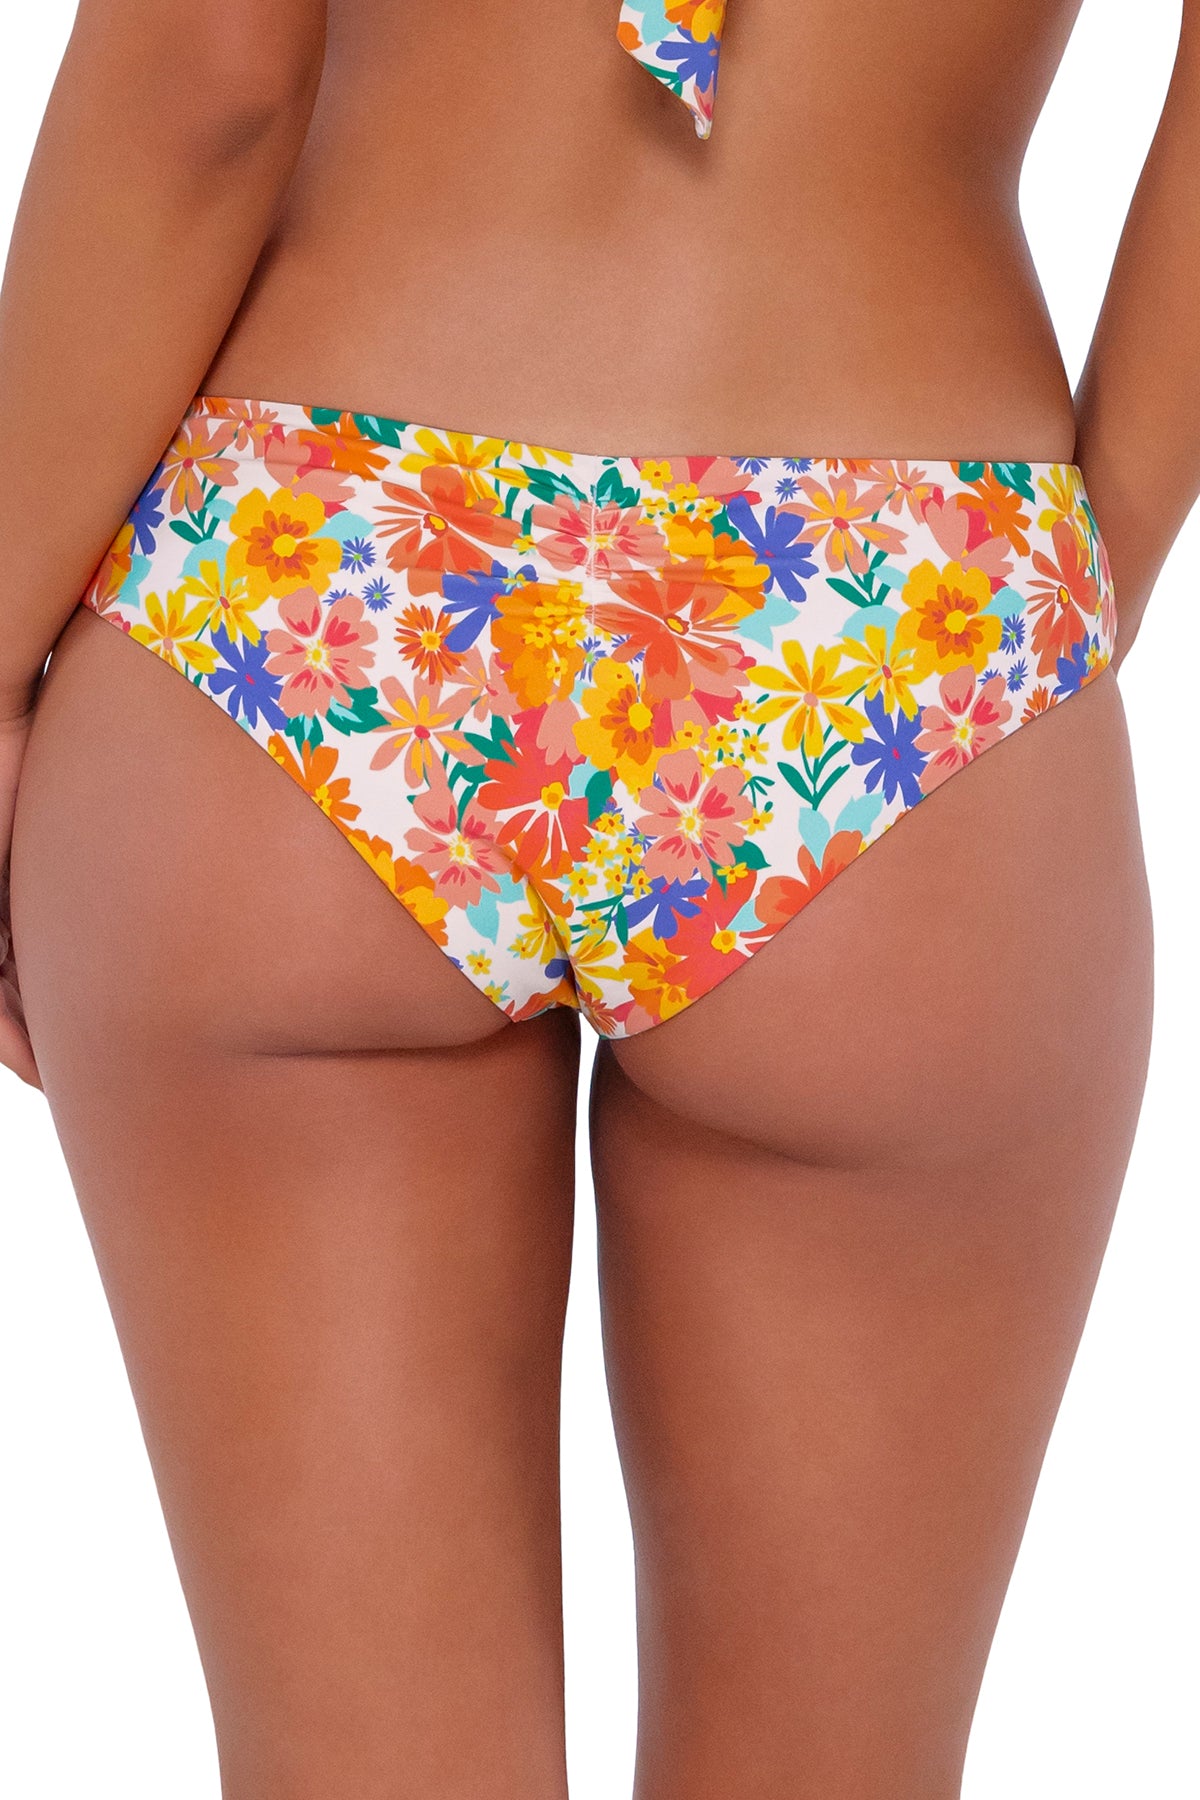 Back pose #1 of Chonzie wearing Swim Systems Beach Blooms Hazel Hipster Bottom